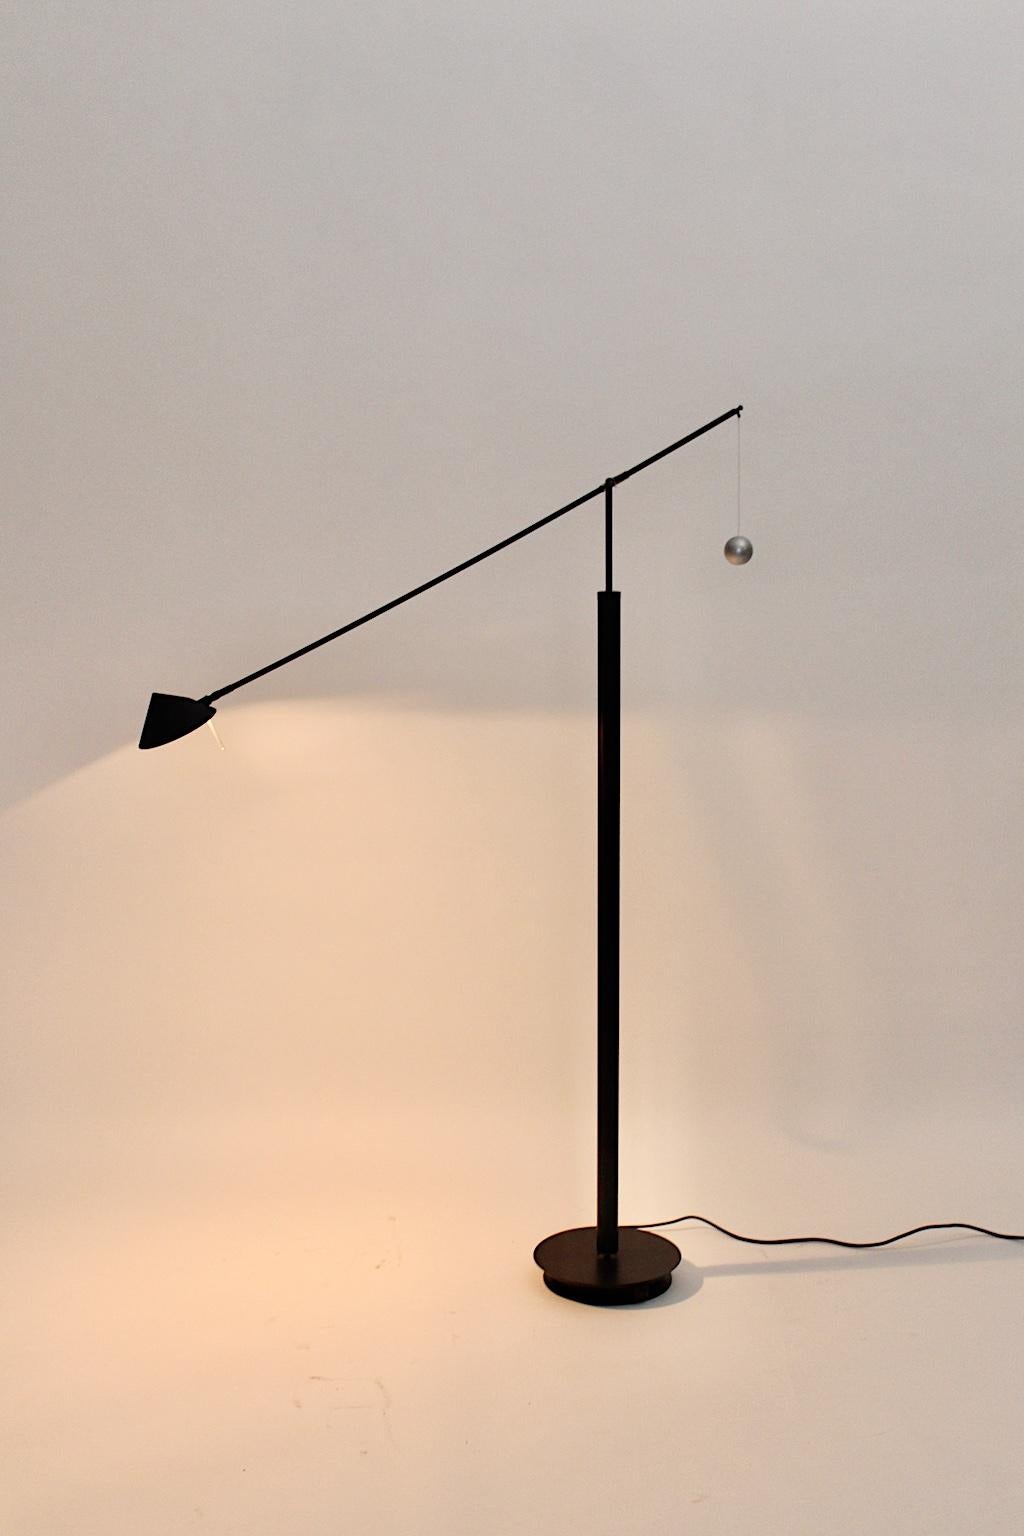 Late 20th Century Postmodern Vintage Black Floor Lamp by Carlo Forcolini 1989 for Artemide Italy For Sale